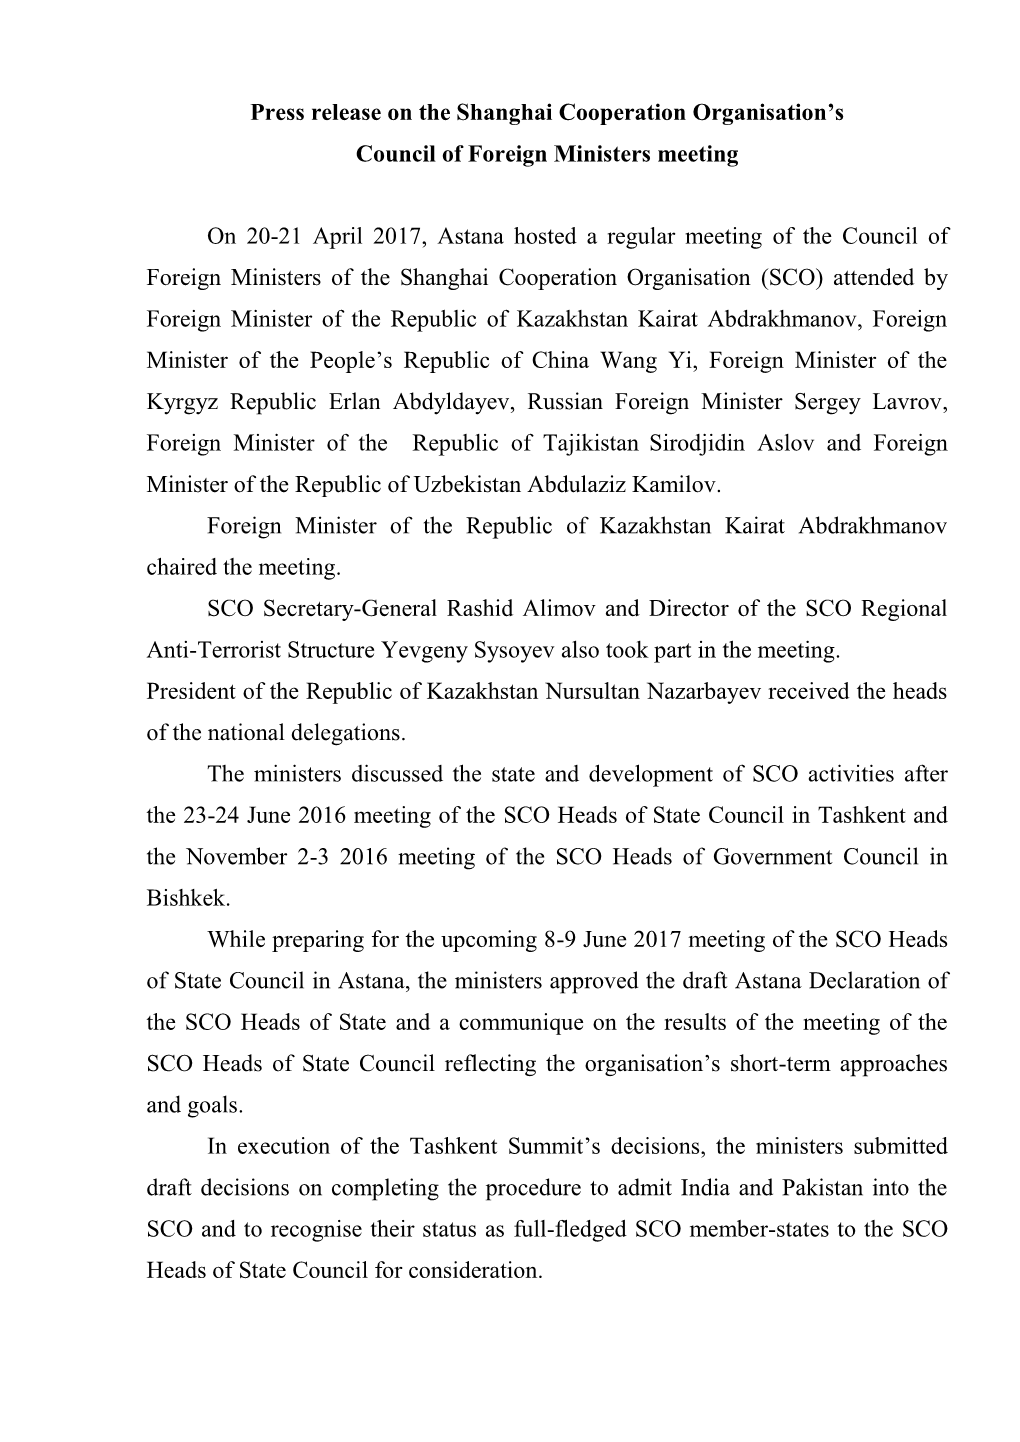 Press Release on the Shanghai Cooperation Organisation's Council